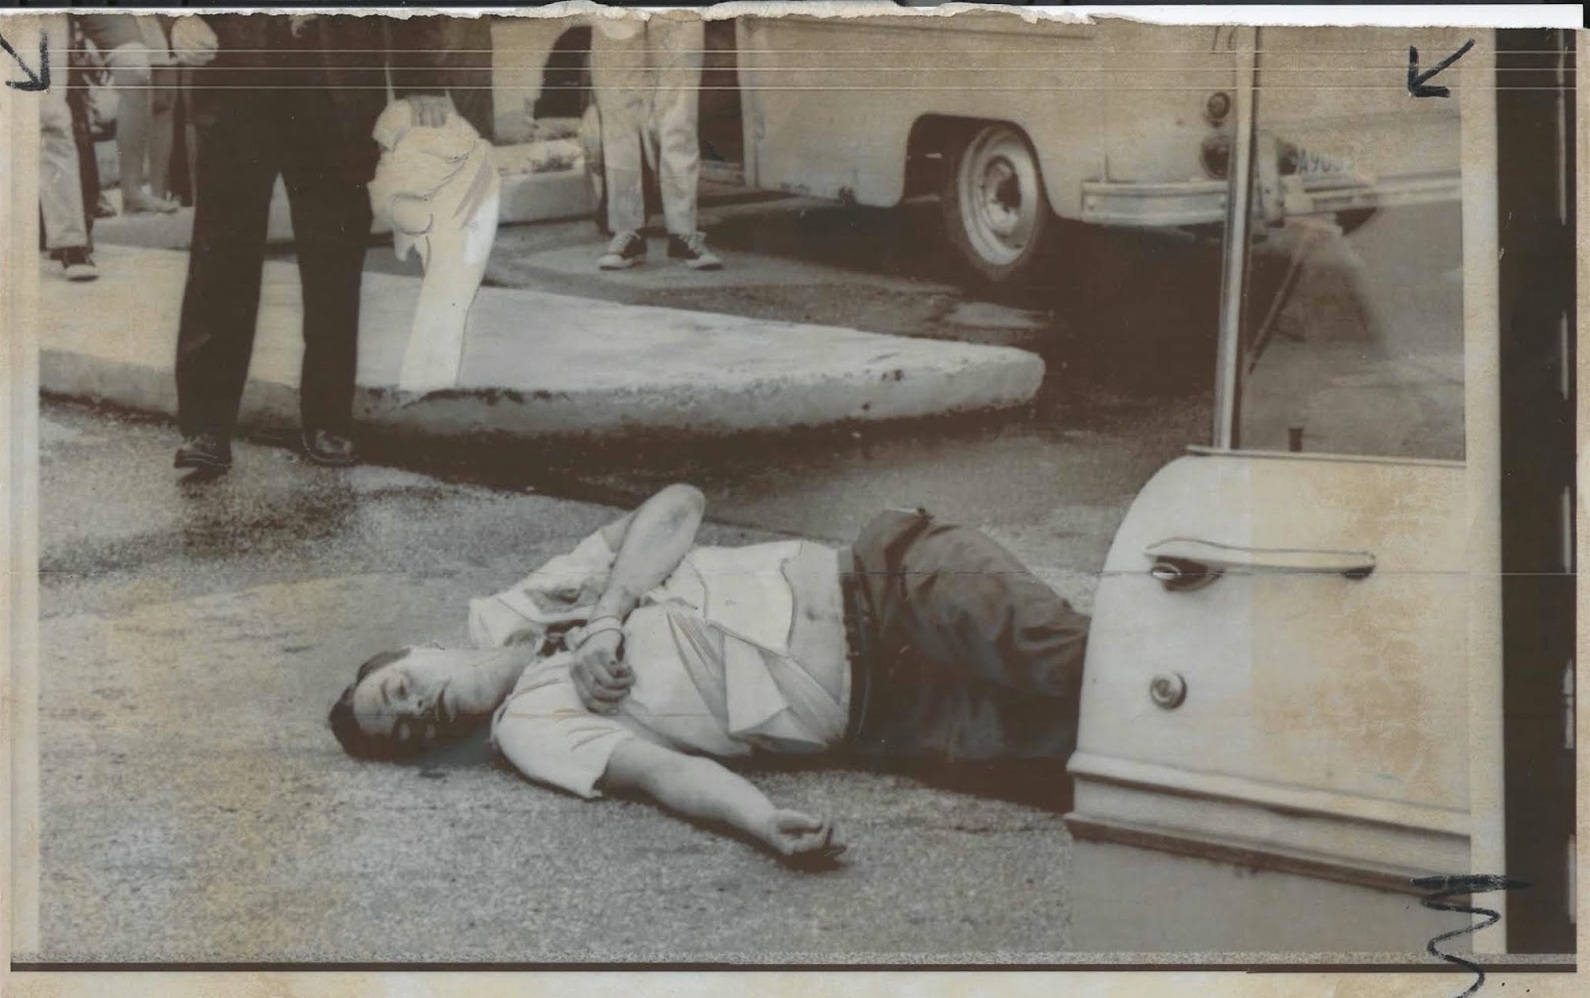 a photo from The Daily Telegraph of George Lincoln Rockwell lying dead